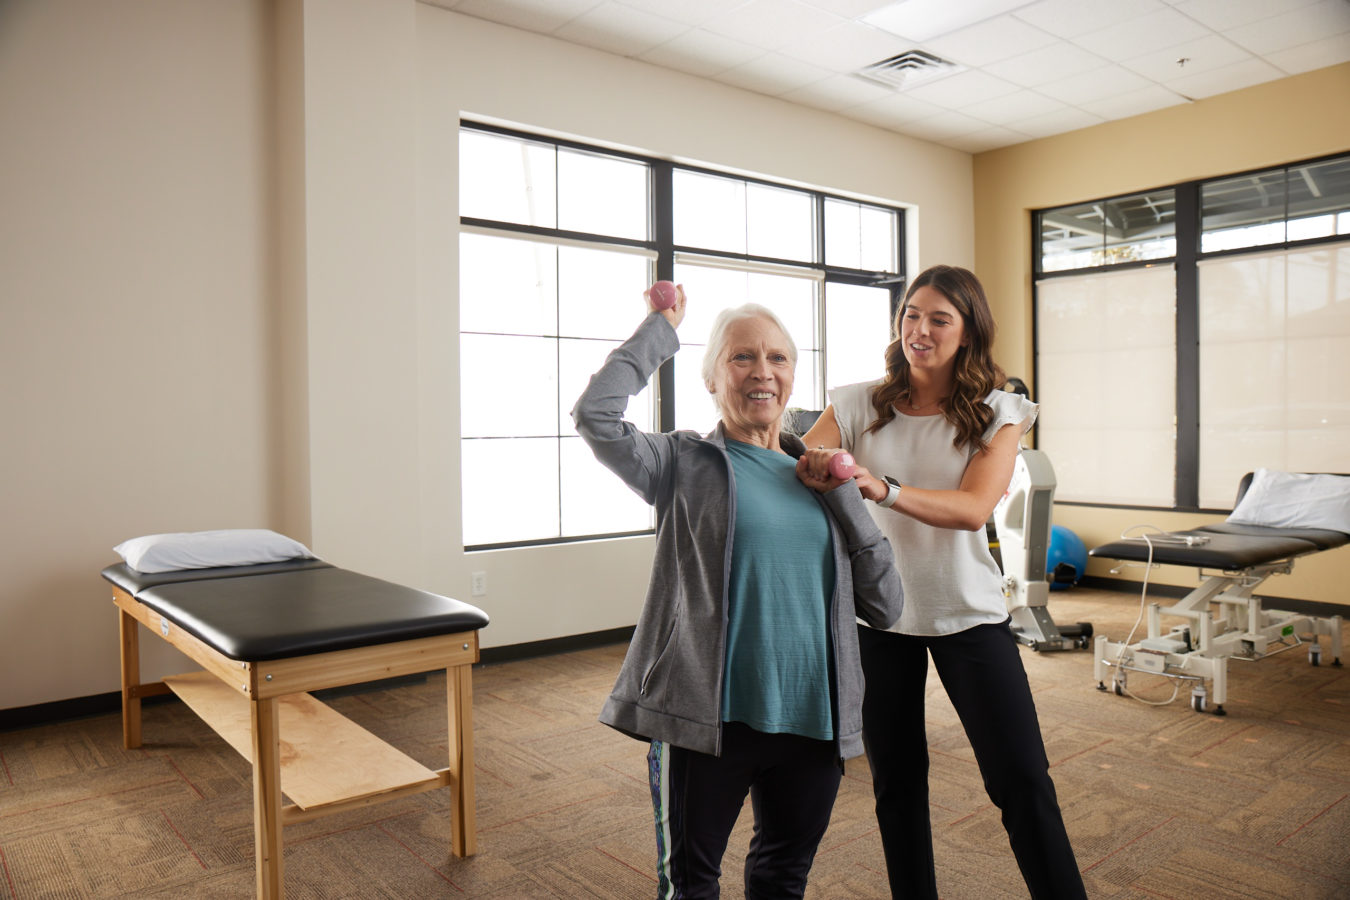 older woman with a blue shirt on lighting small weights during physical therapy appointment